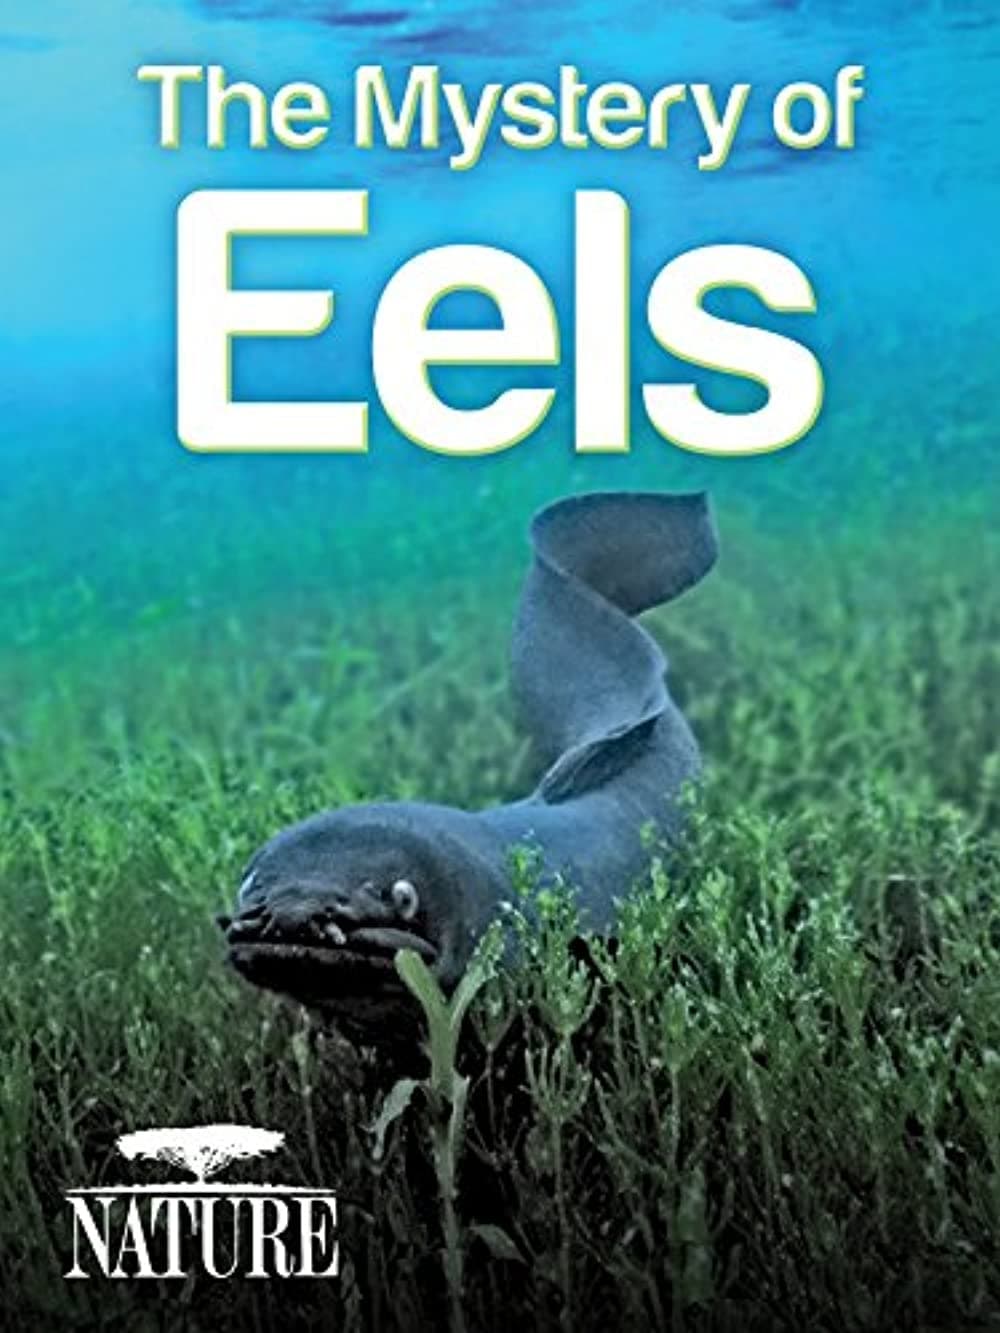 The Mystery of Eels